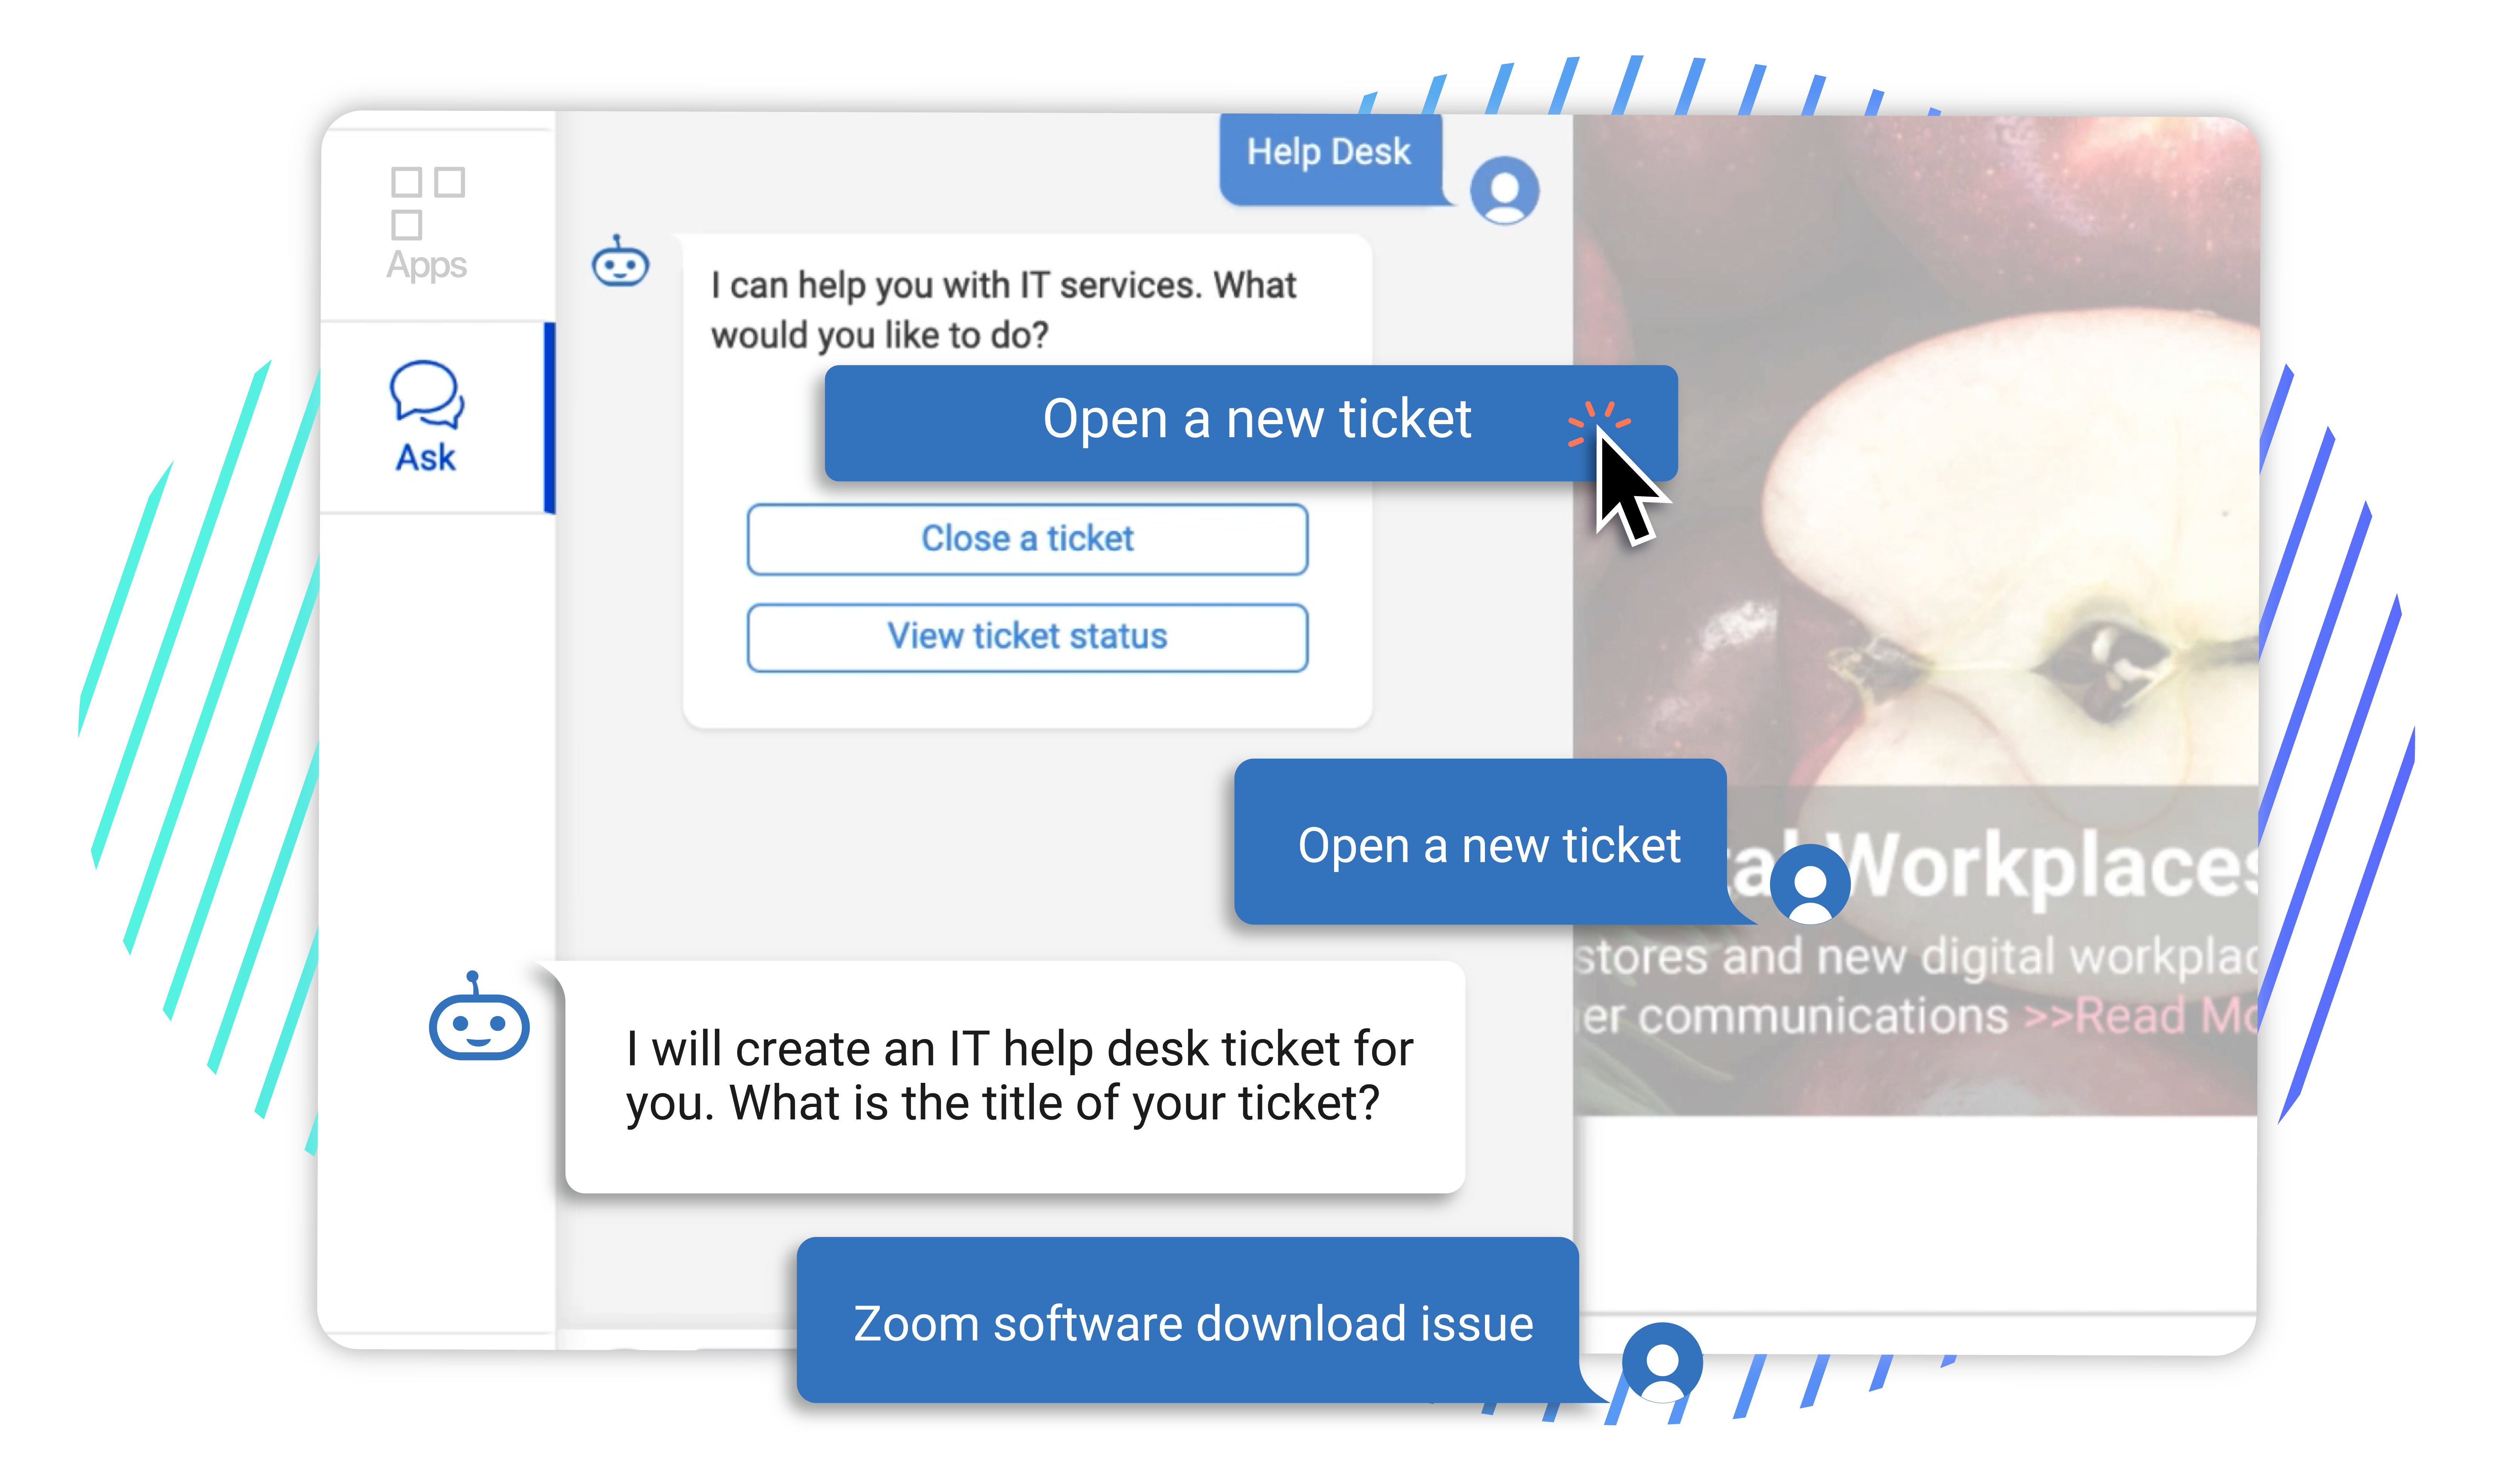 Employees can utilize the Workgrid Digital Assistant to submit, update, respond to, and close out help desk tickets without having to login to multiple systems.